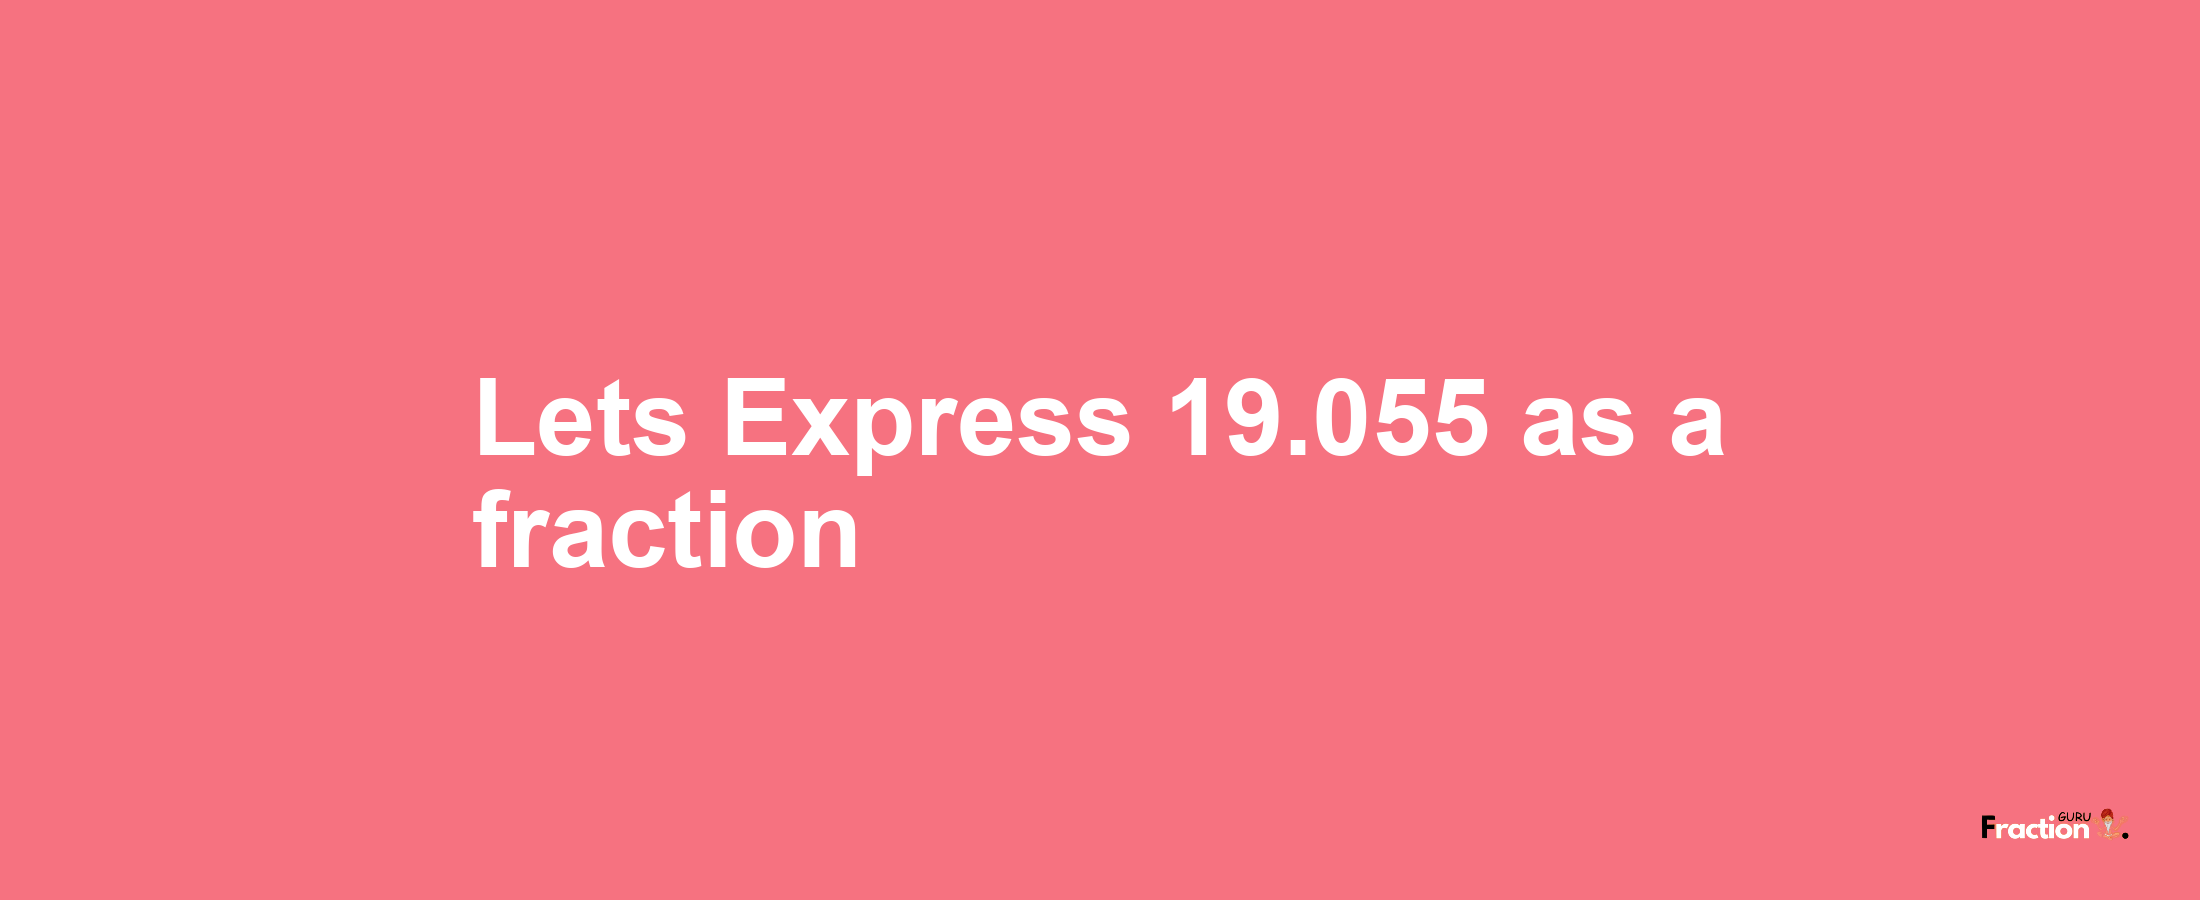 Lets Express 19.055 as afraction